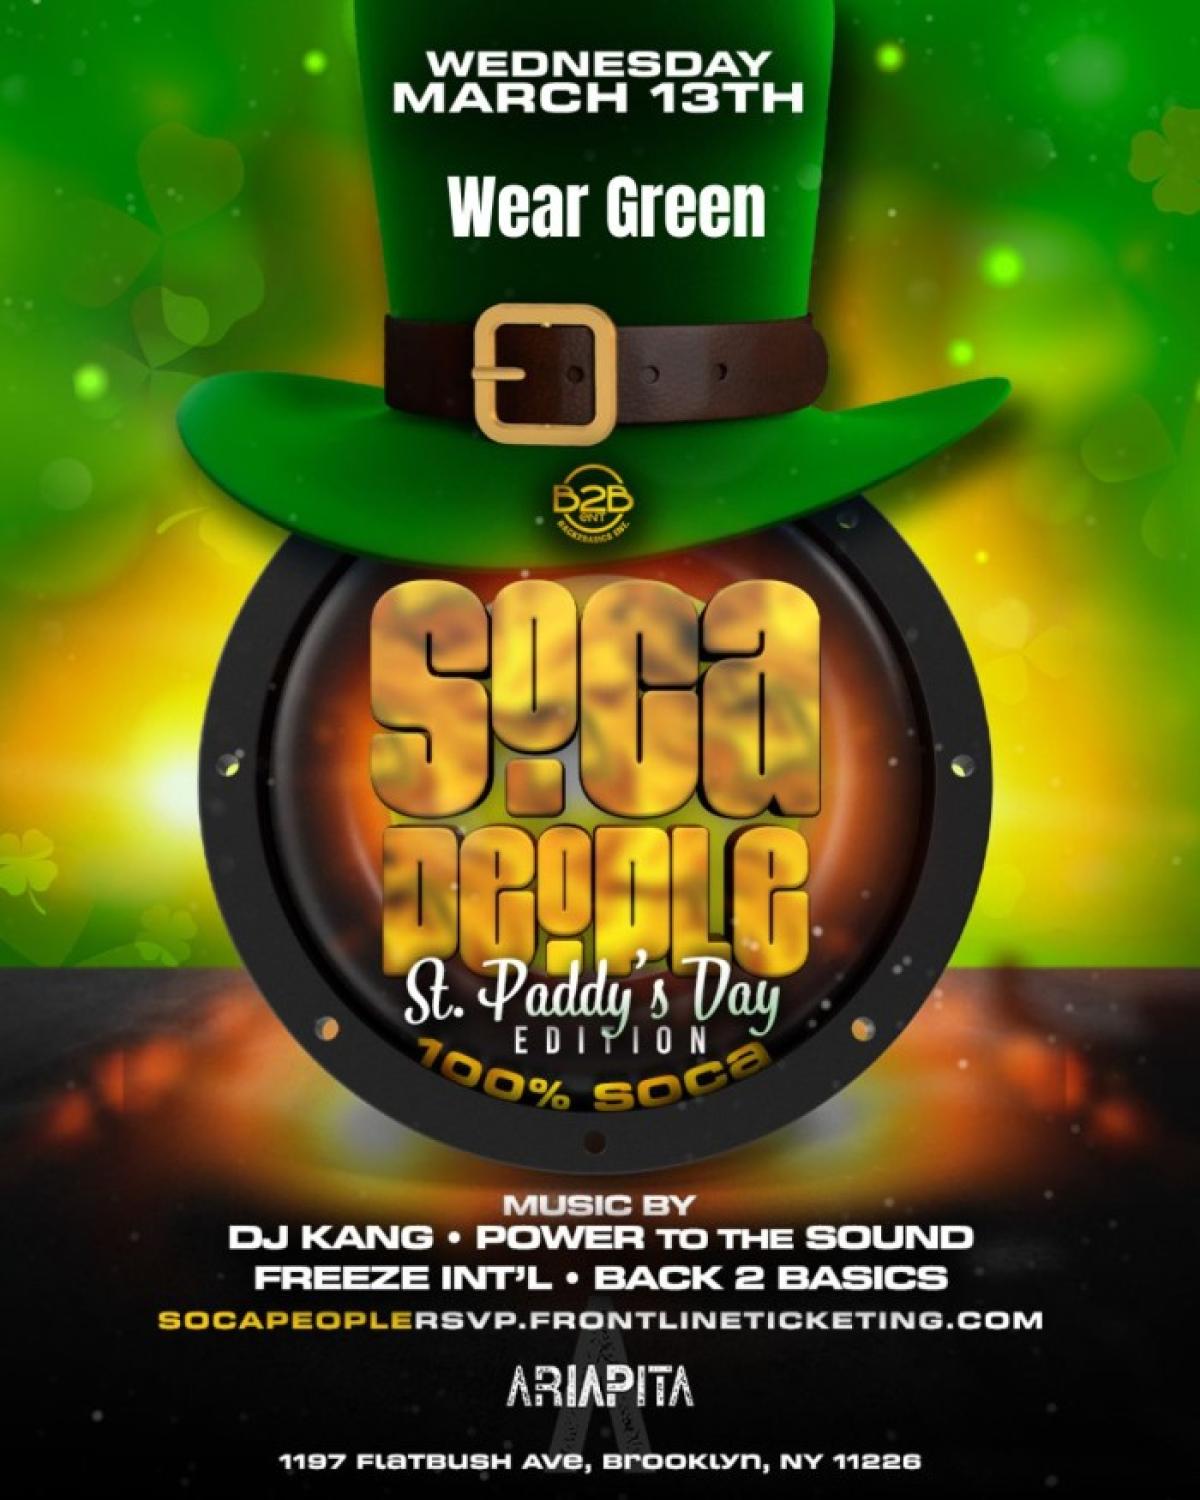 Soca People - St. Paddy's Day Edition flyer or graphic.